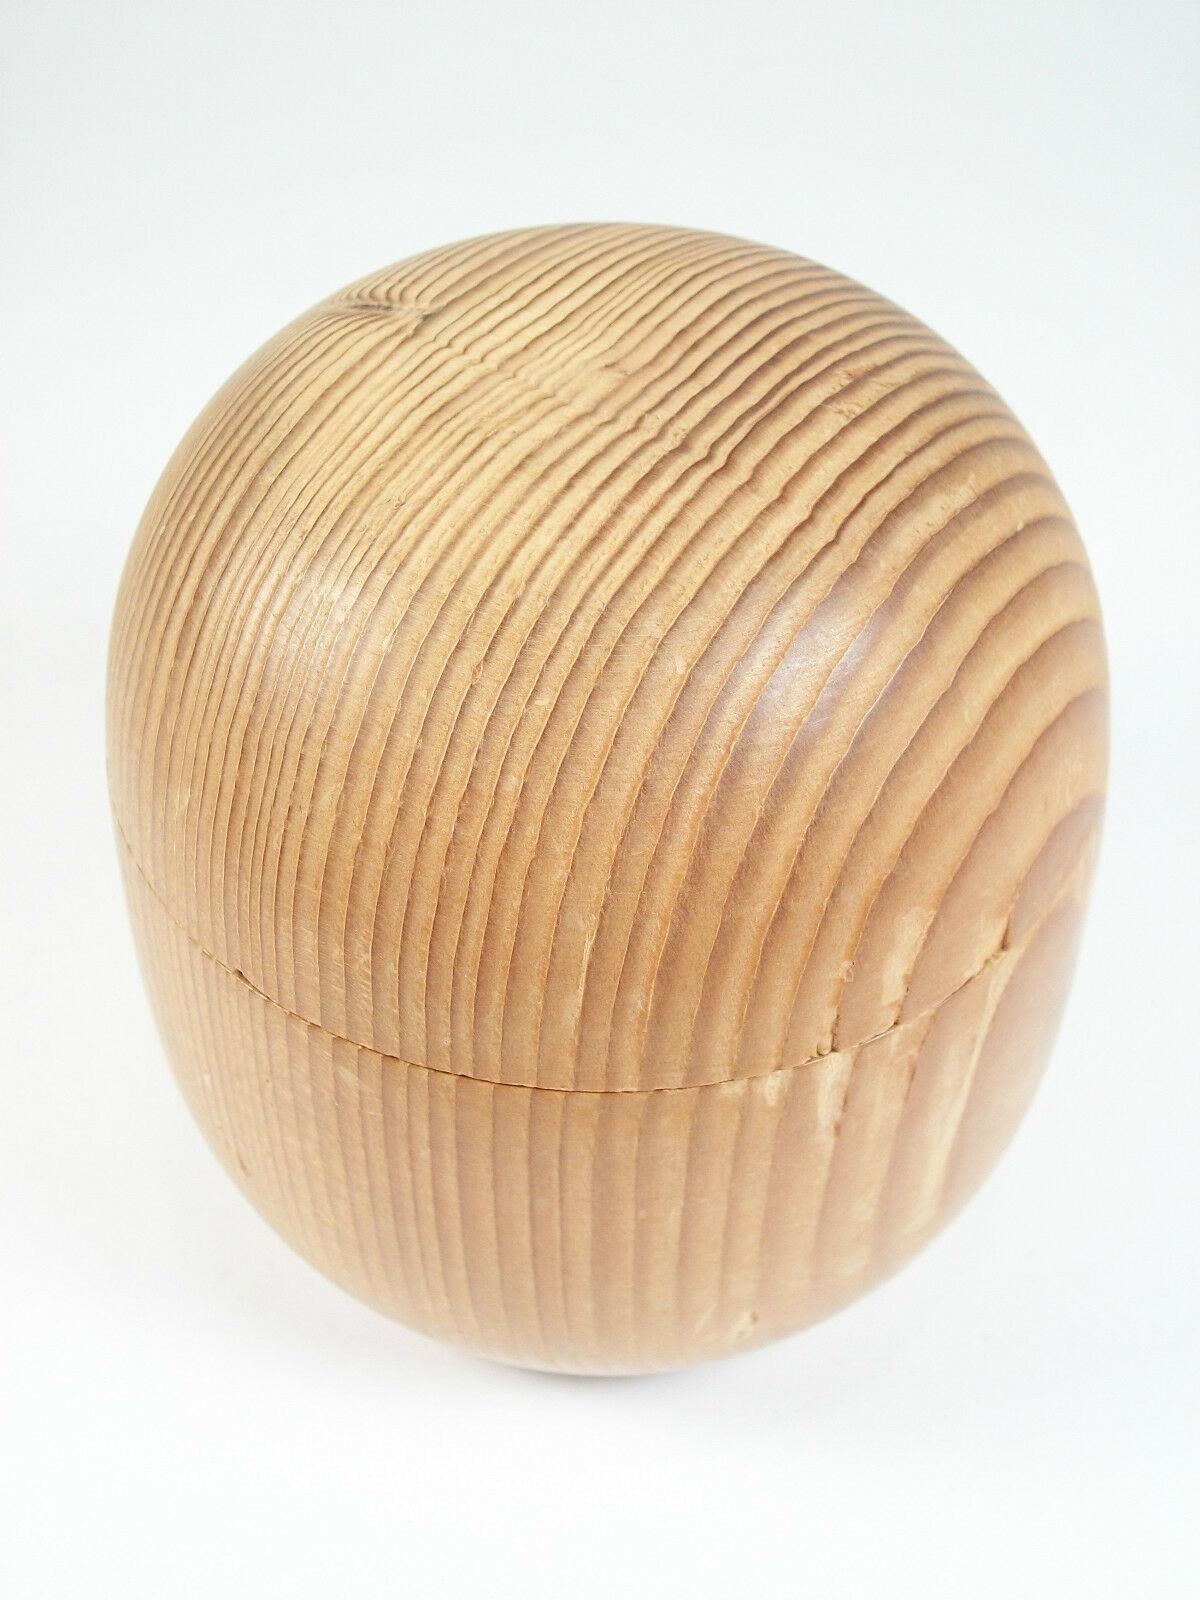 Antique Scandinavian Pine Canister, Treen Ware, Early 20th Century For Sale 2